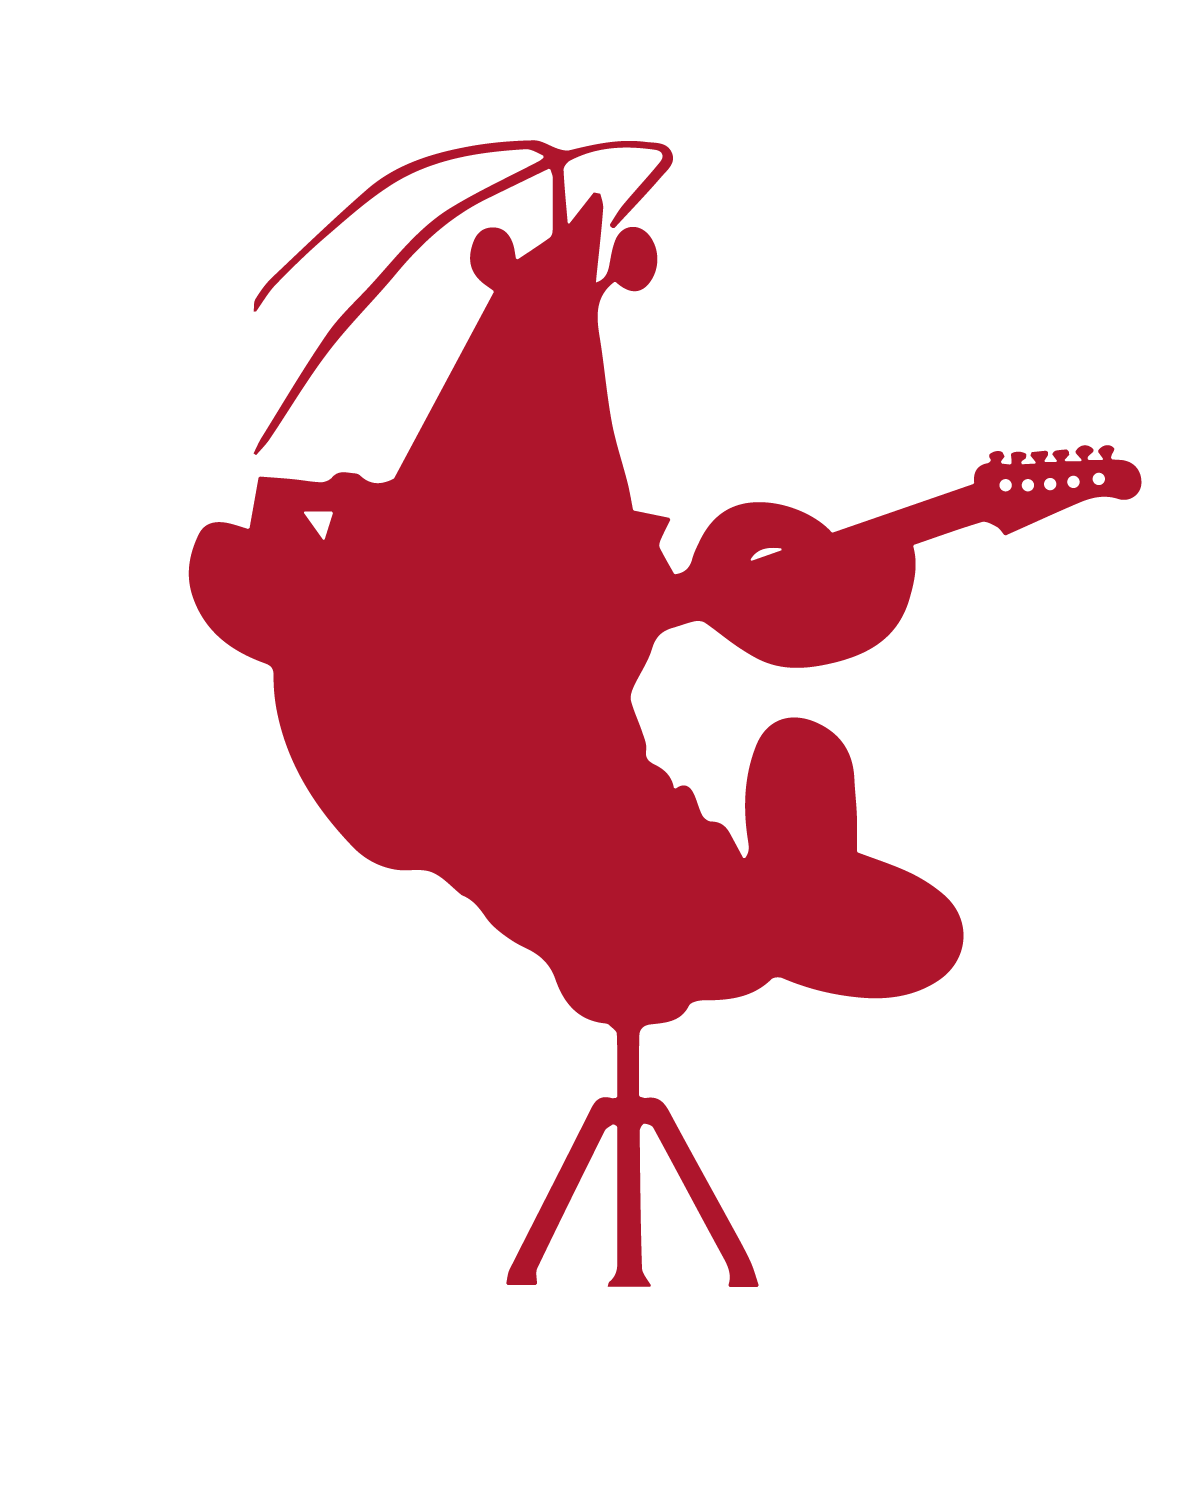 crawfish for a cause logo in red